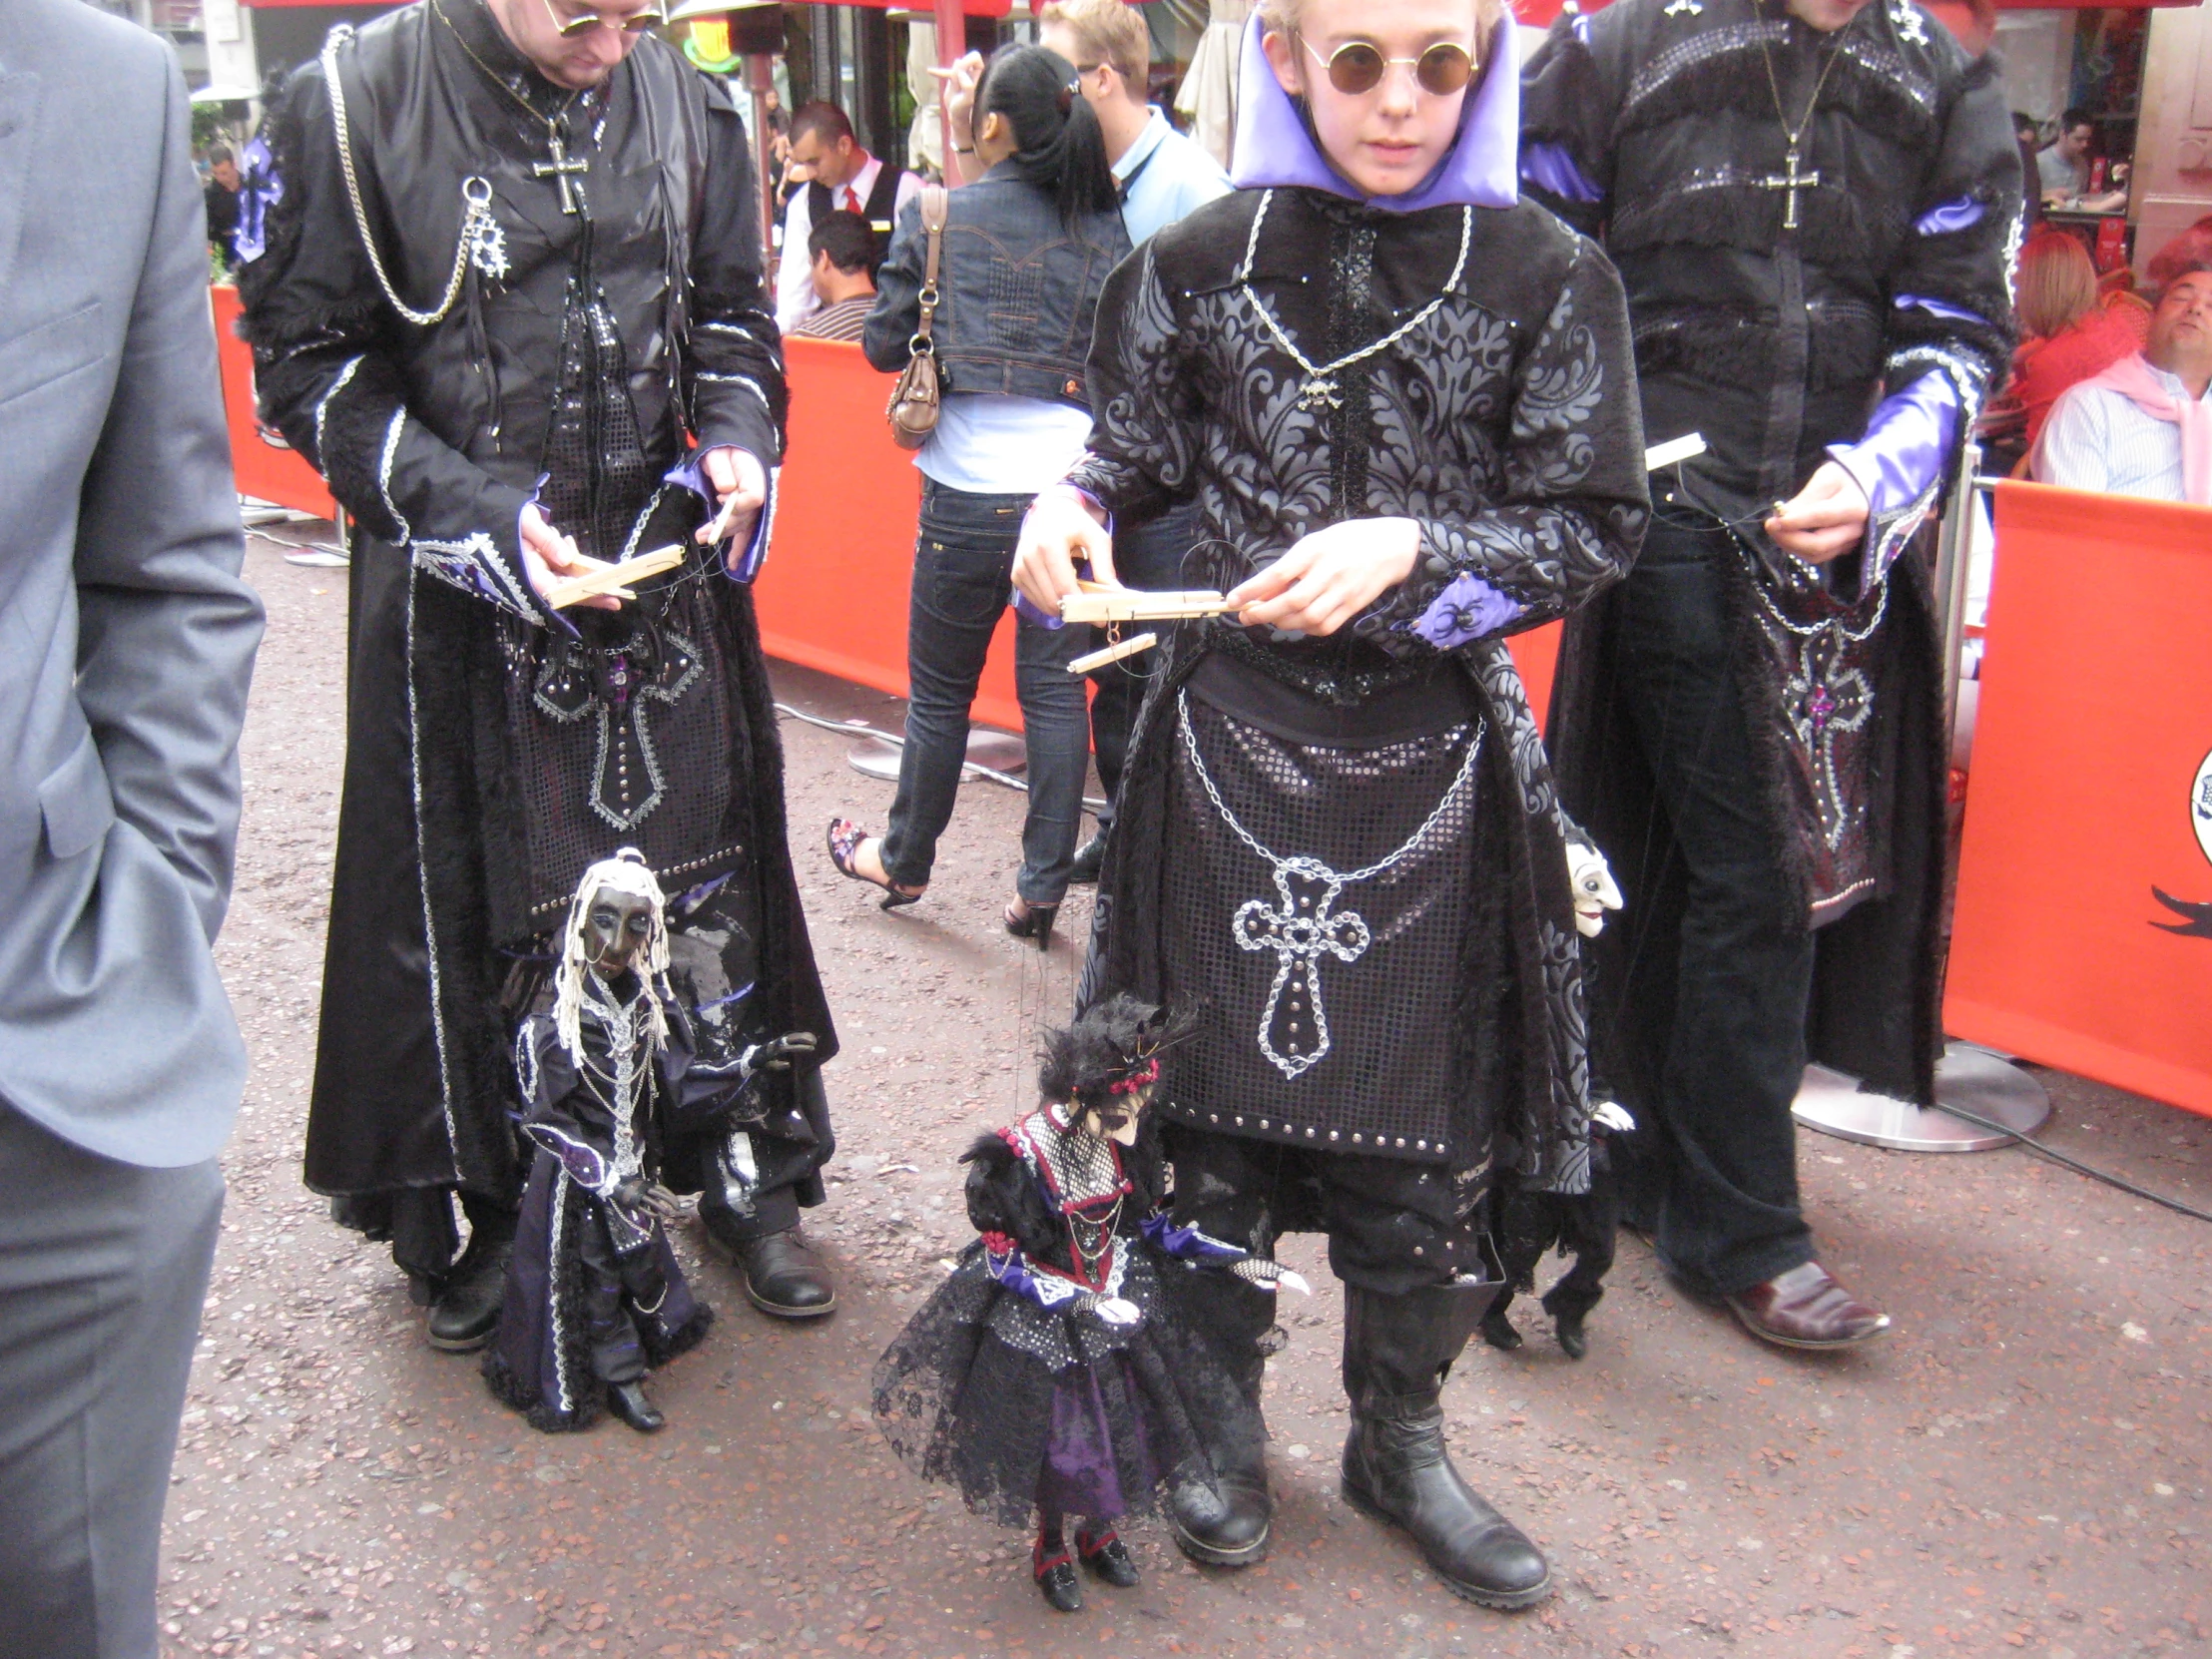 a couple of women dressed in black costumes